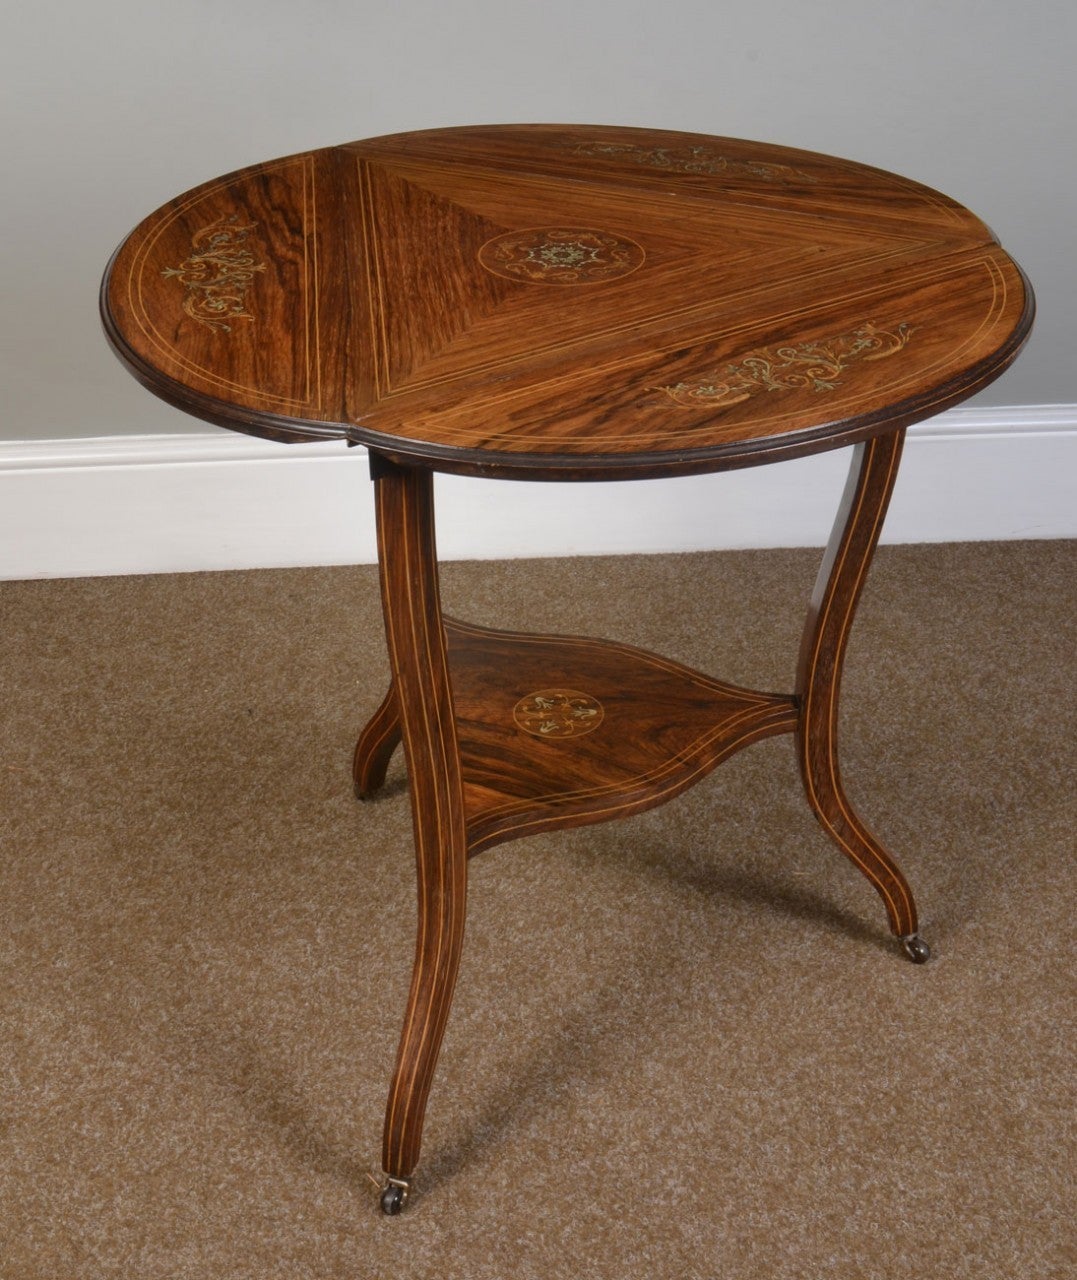 Rosewood inlaid triangular occasional table having three drop flaps inlaid with floral design and ivory flowers above shaped turned legs united by under tier  raised up on brass castors
Dimensions
Height 27.5 Inches
Width 22.5 Inches